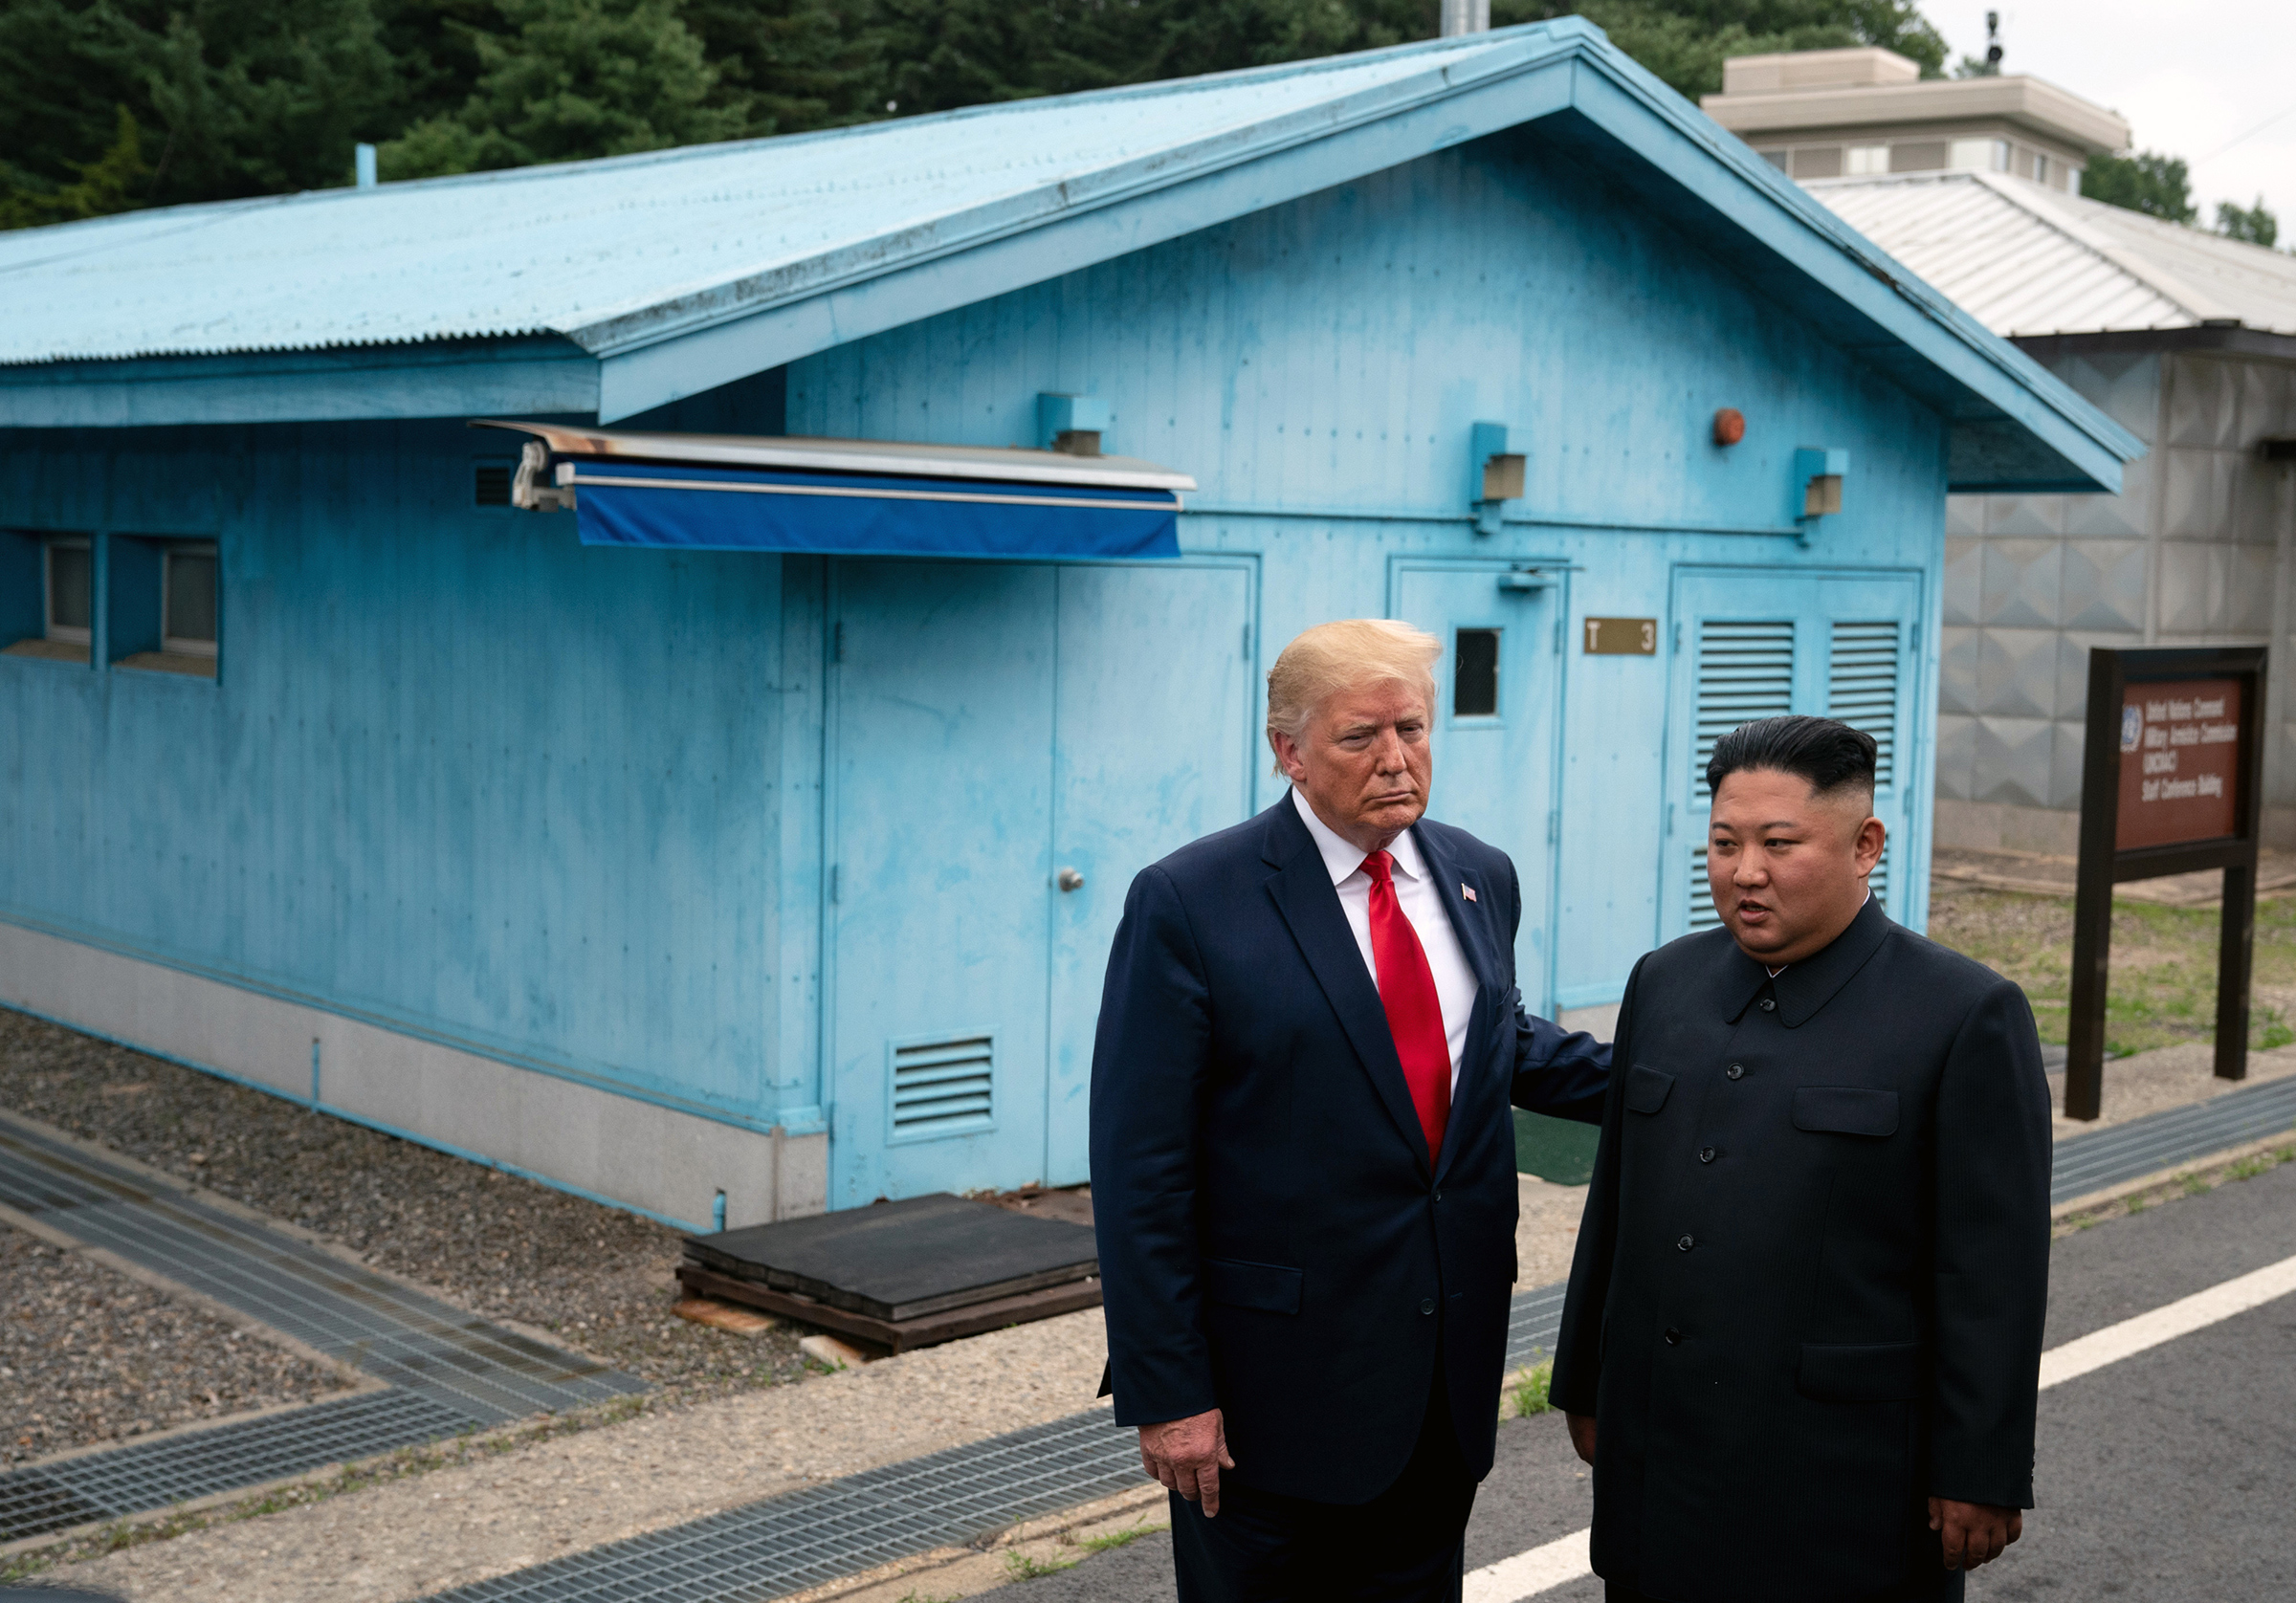 President Donald Trump and North Korean leader Kim Jong-un stand on the South Korean side of the Demilitarized Zone between on June 30, 2019